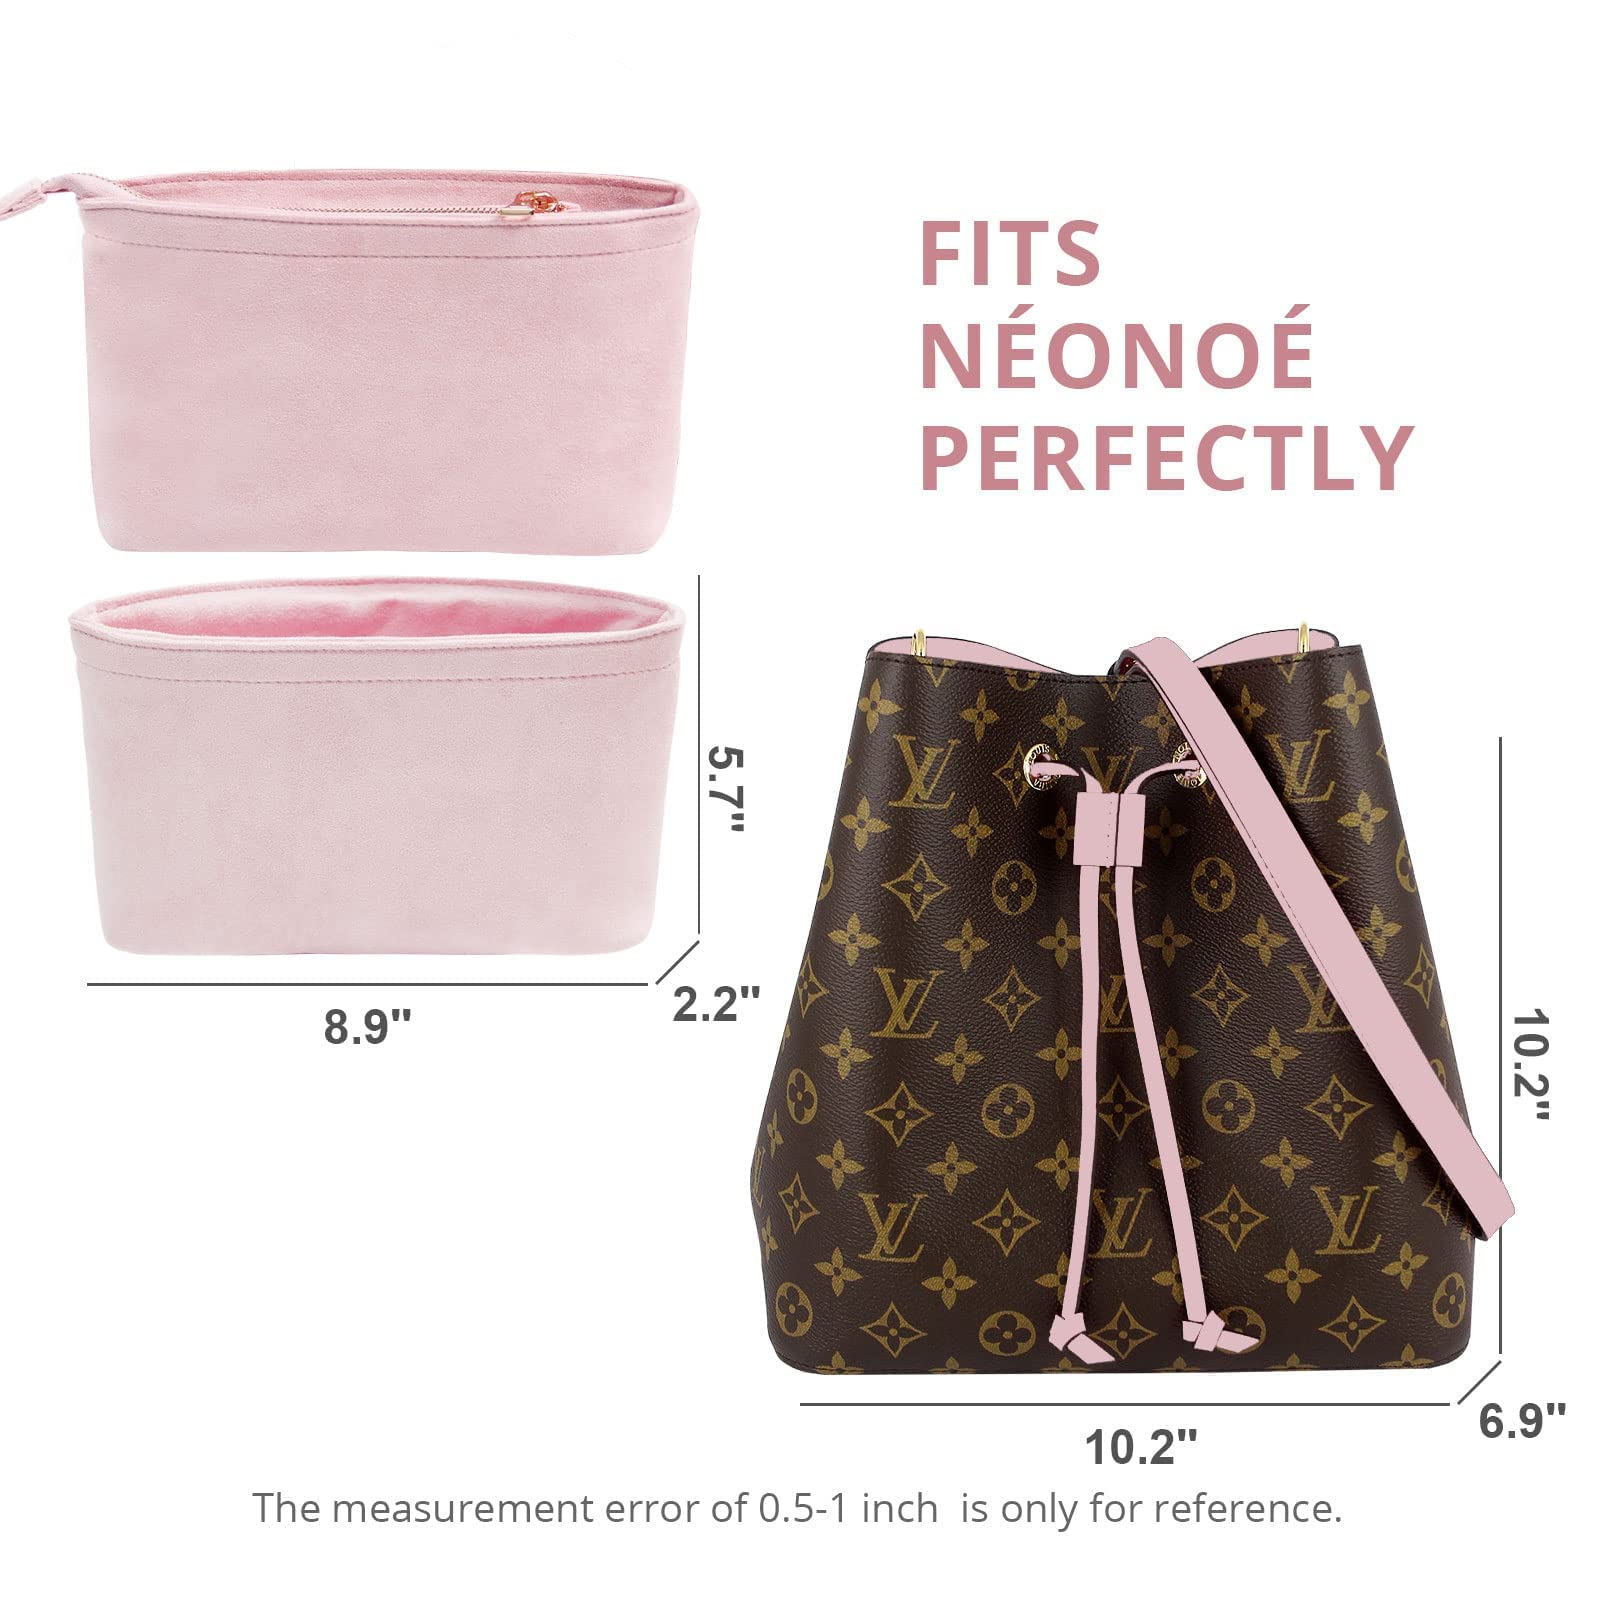 NeoNoe Suedette Leather Basic Style Set of 2 Handbag Organizers in Rose  Pink (More Colors)